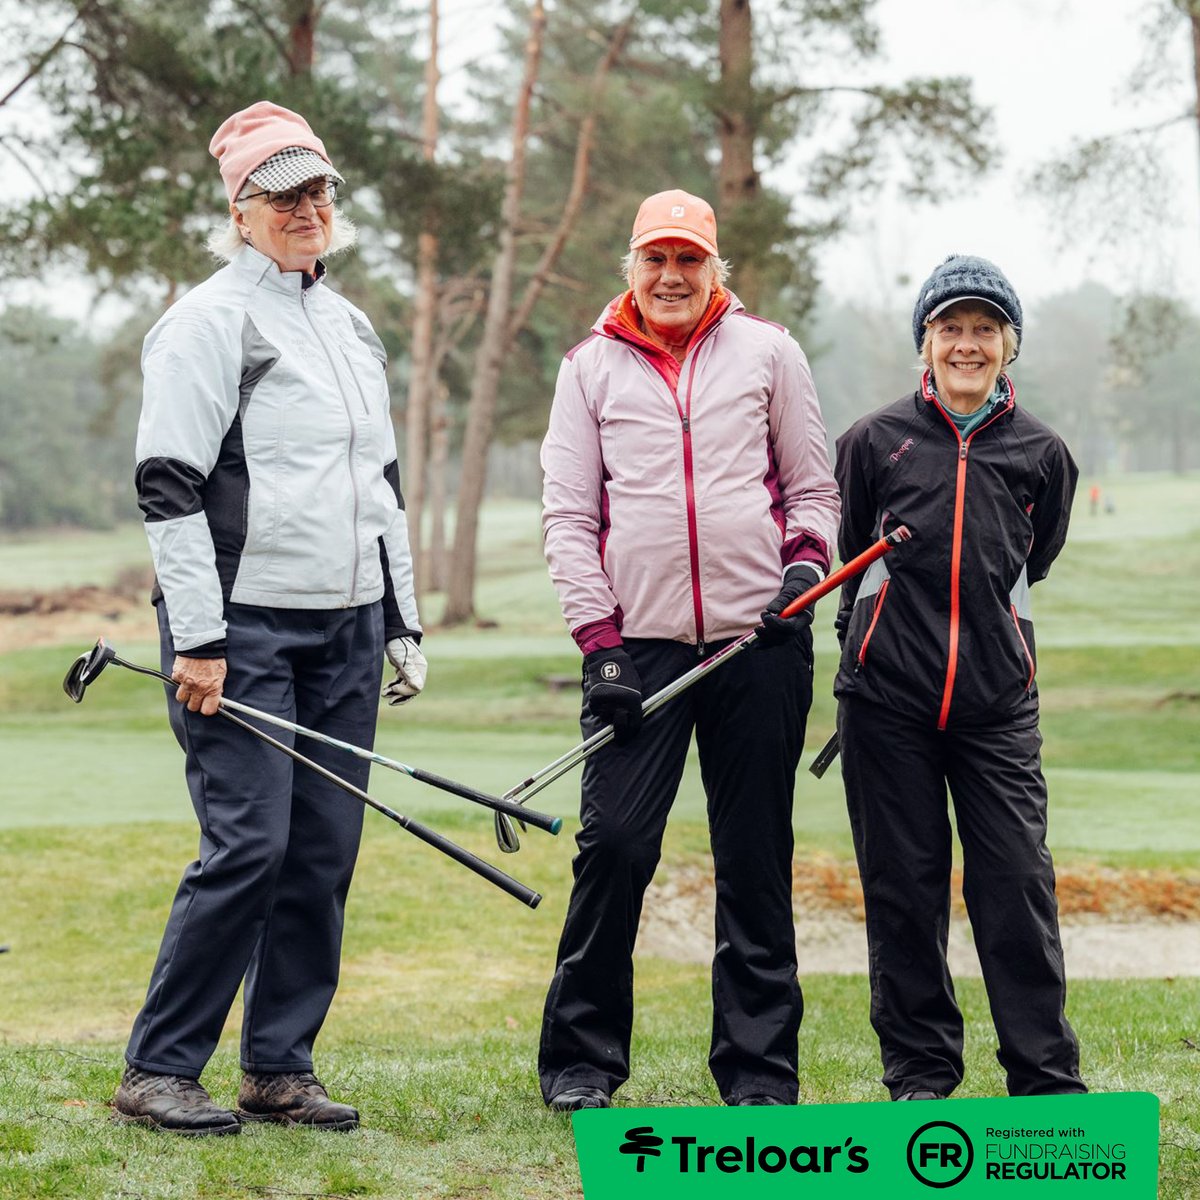 Our Charity Golf Day is just around the corner! Join us on 5 June for a day of golf and more. Test your luck in our raffle or bid to win big in our auction. It's not just golf—it's an opportunity for excitement and giving! Book your space now - treloar.org.uk/events/the-tre…